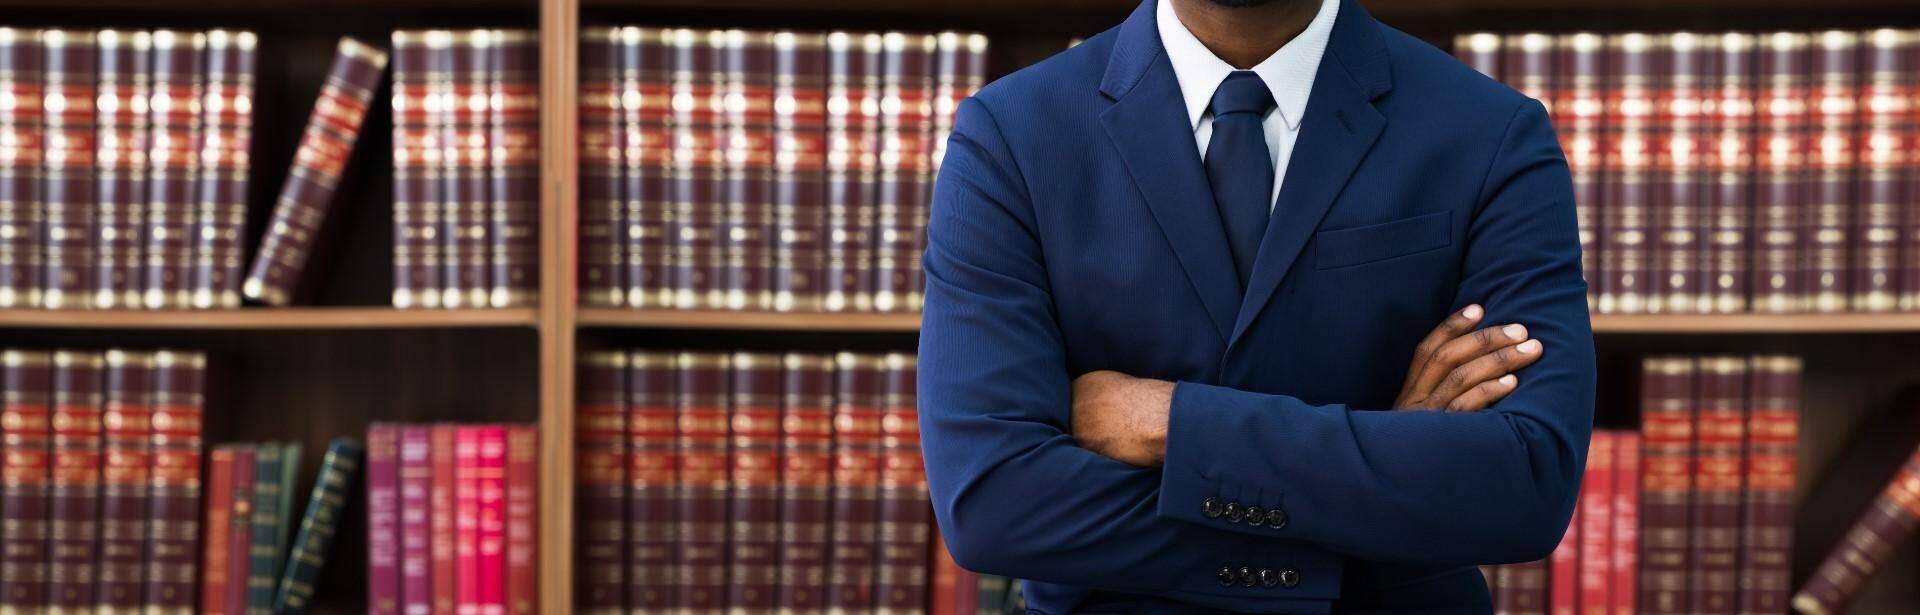 A black lawyer standing in front of a bookshelf of law book in Sugar Hill, Georgia